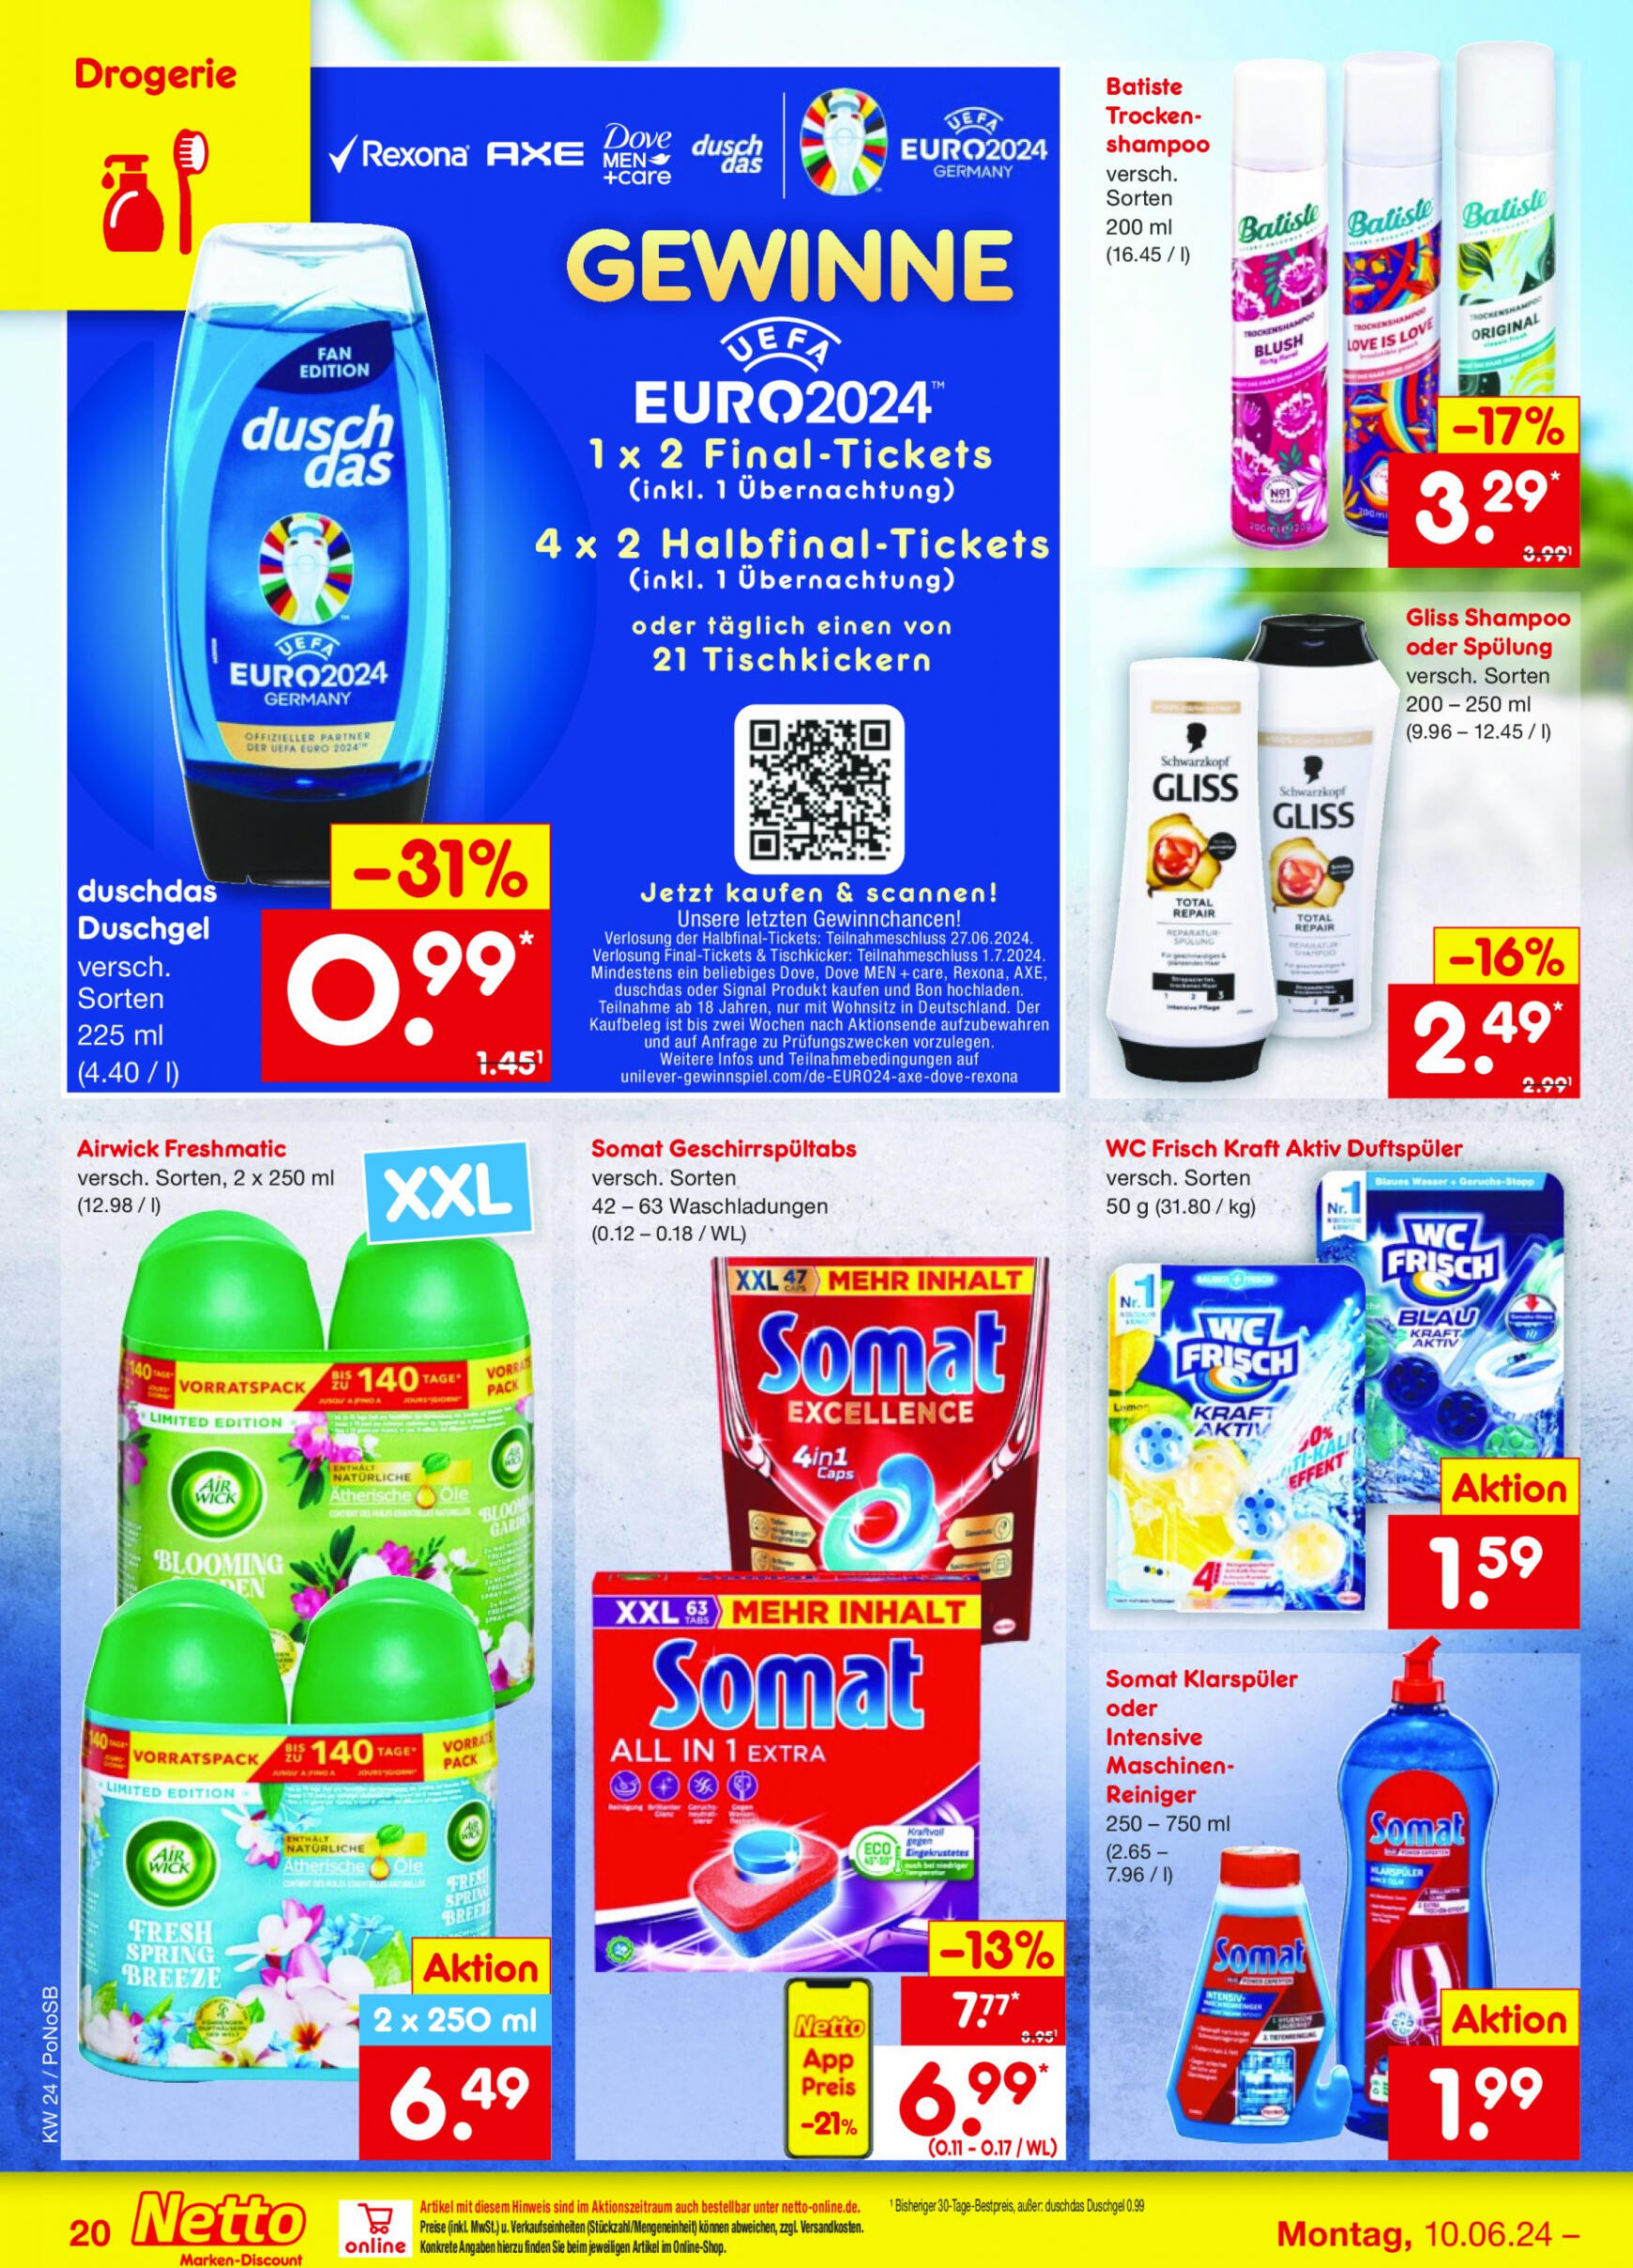 netto - Flyer Netto aktuell 10.06. - 15.06. - page: 34